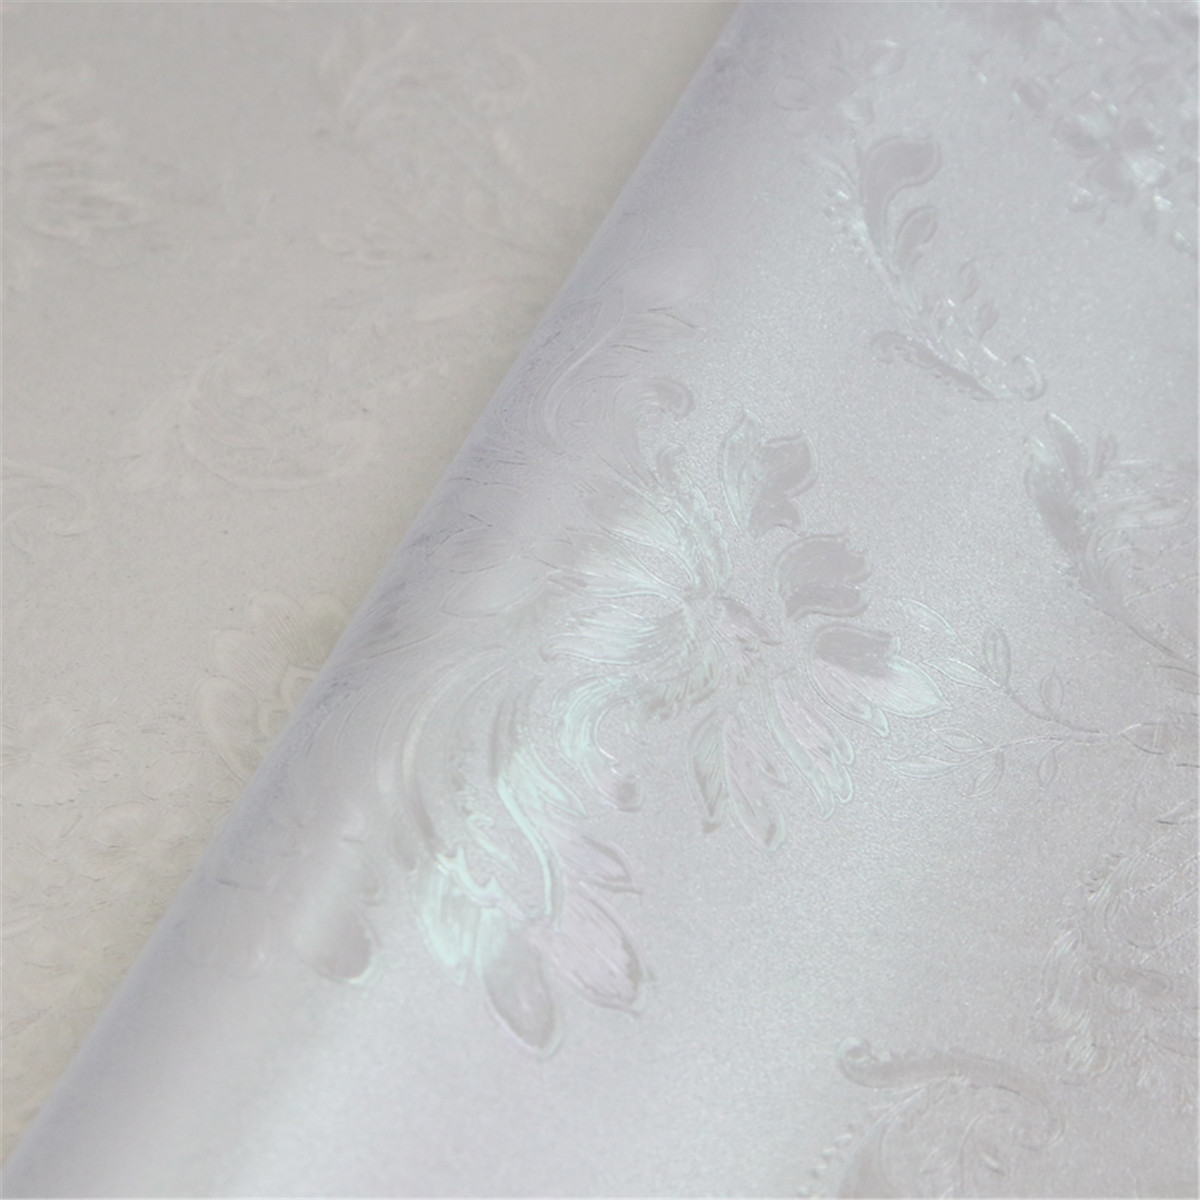 60-x-200cm-Waterproof-PVC-Frosted-Glass-Window-Film-Cover-Window-Privacy-Bedroom-Bathroom-Self-Adhes-1807465-7